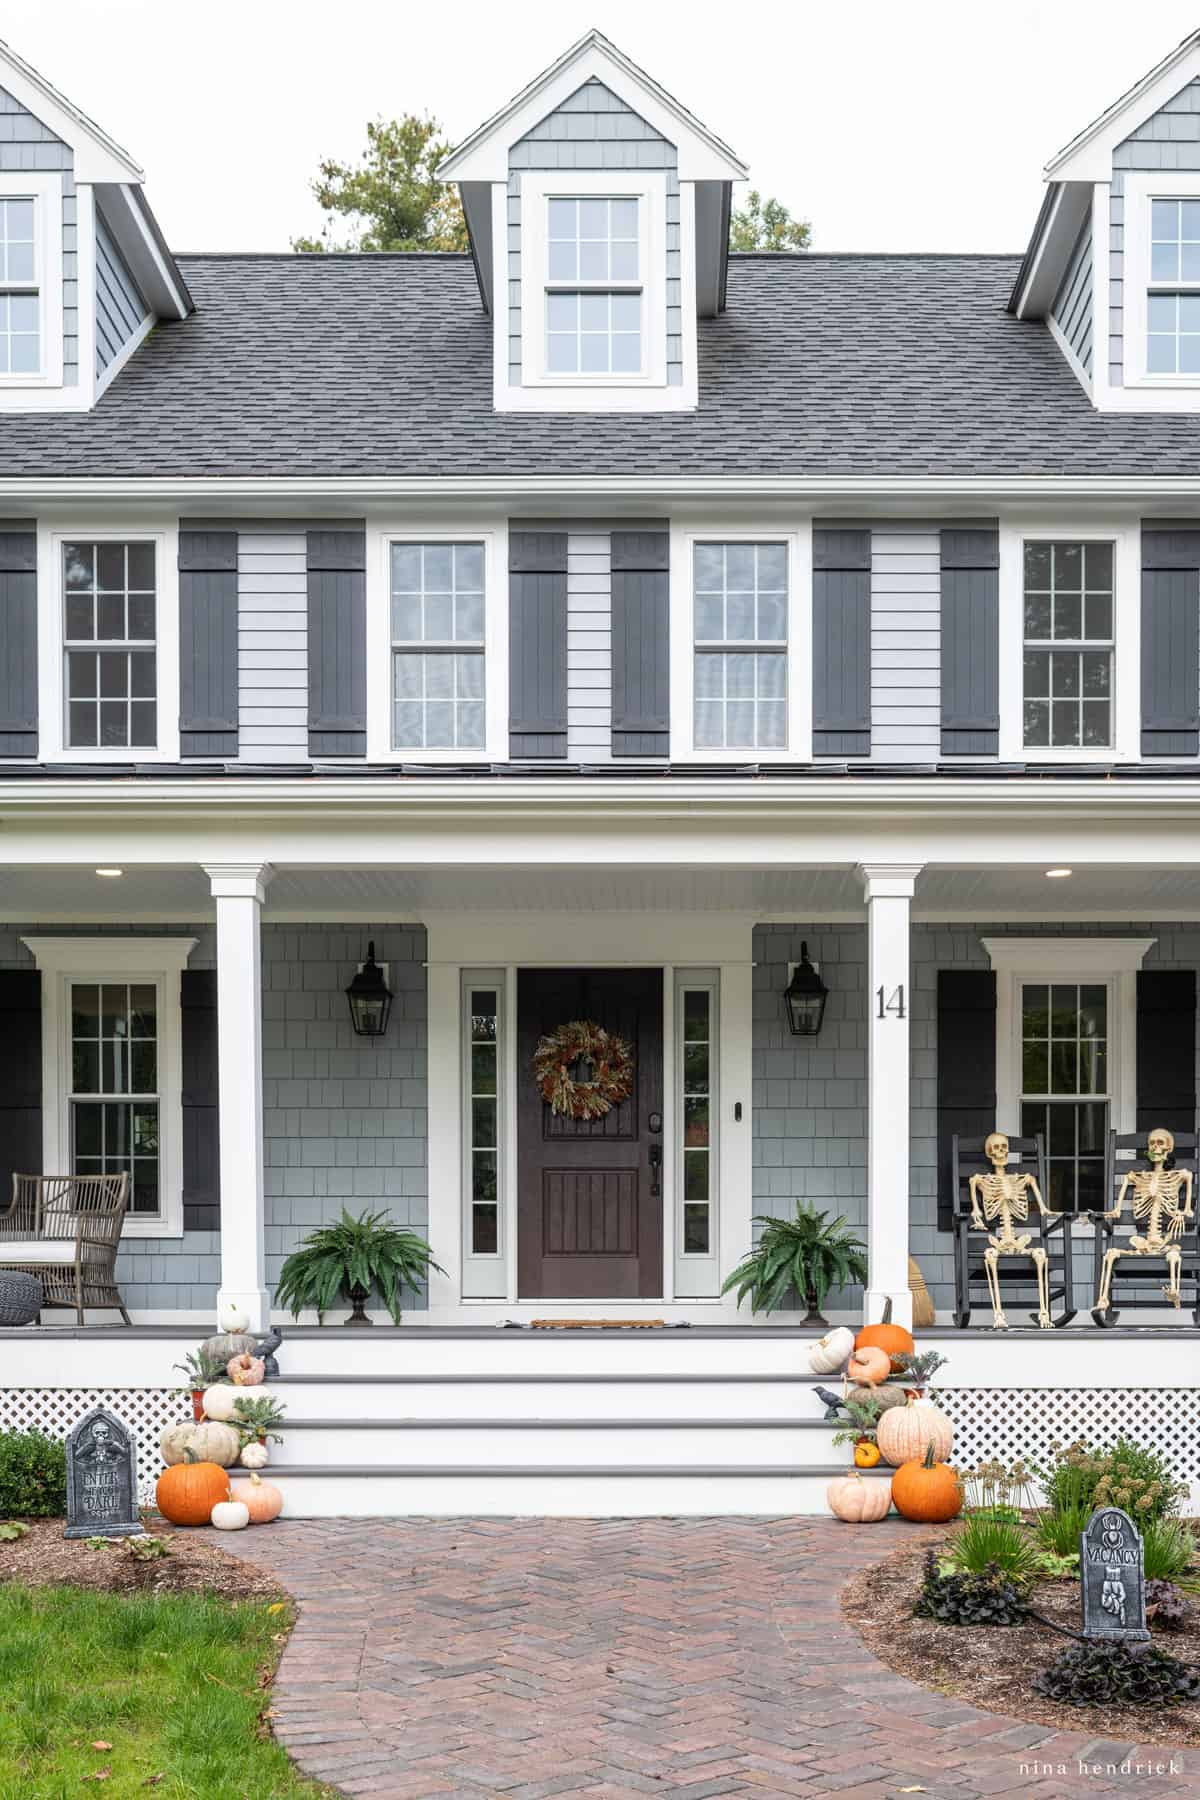 A front porch decorated with pumpkins and a porch swing, perfect for Halloween decorating ideas.